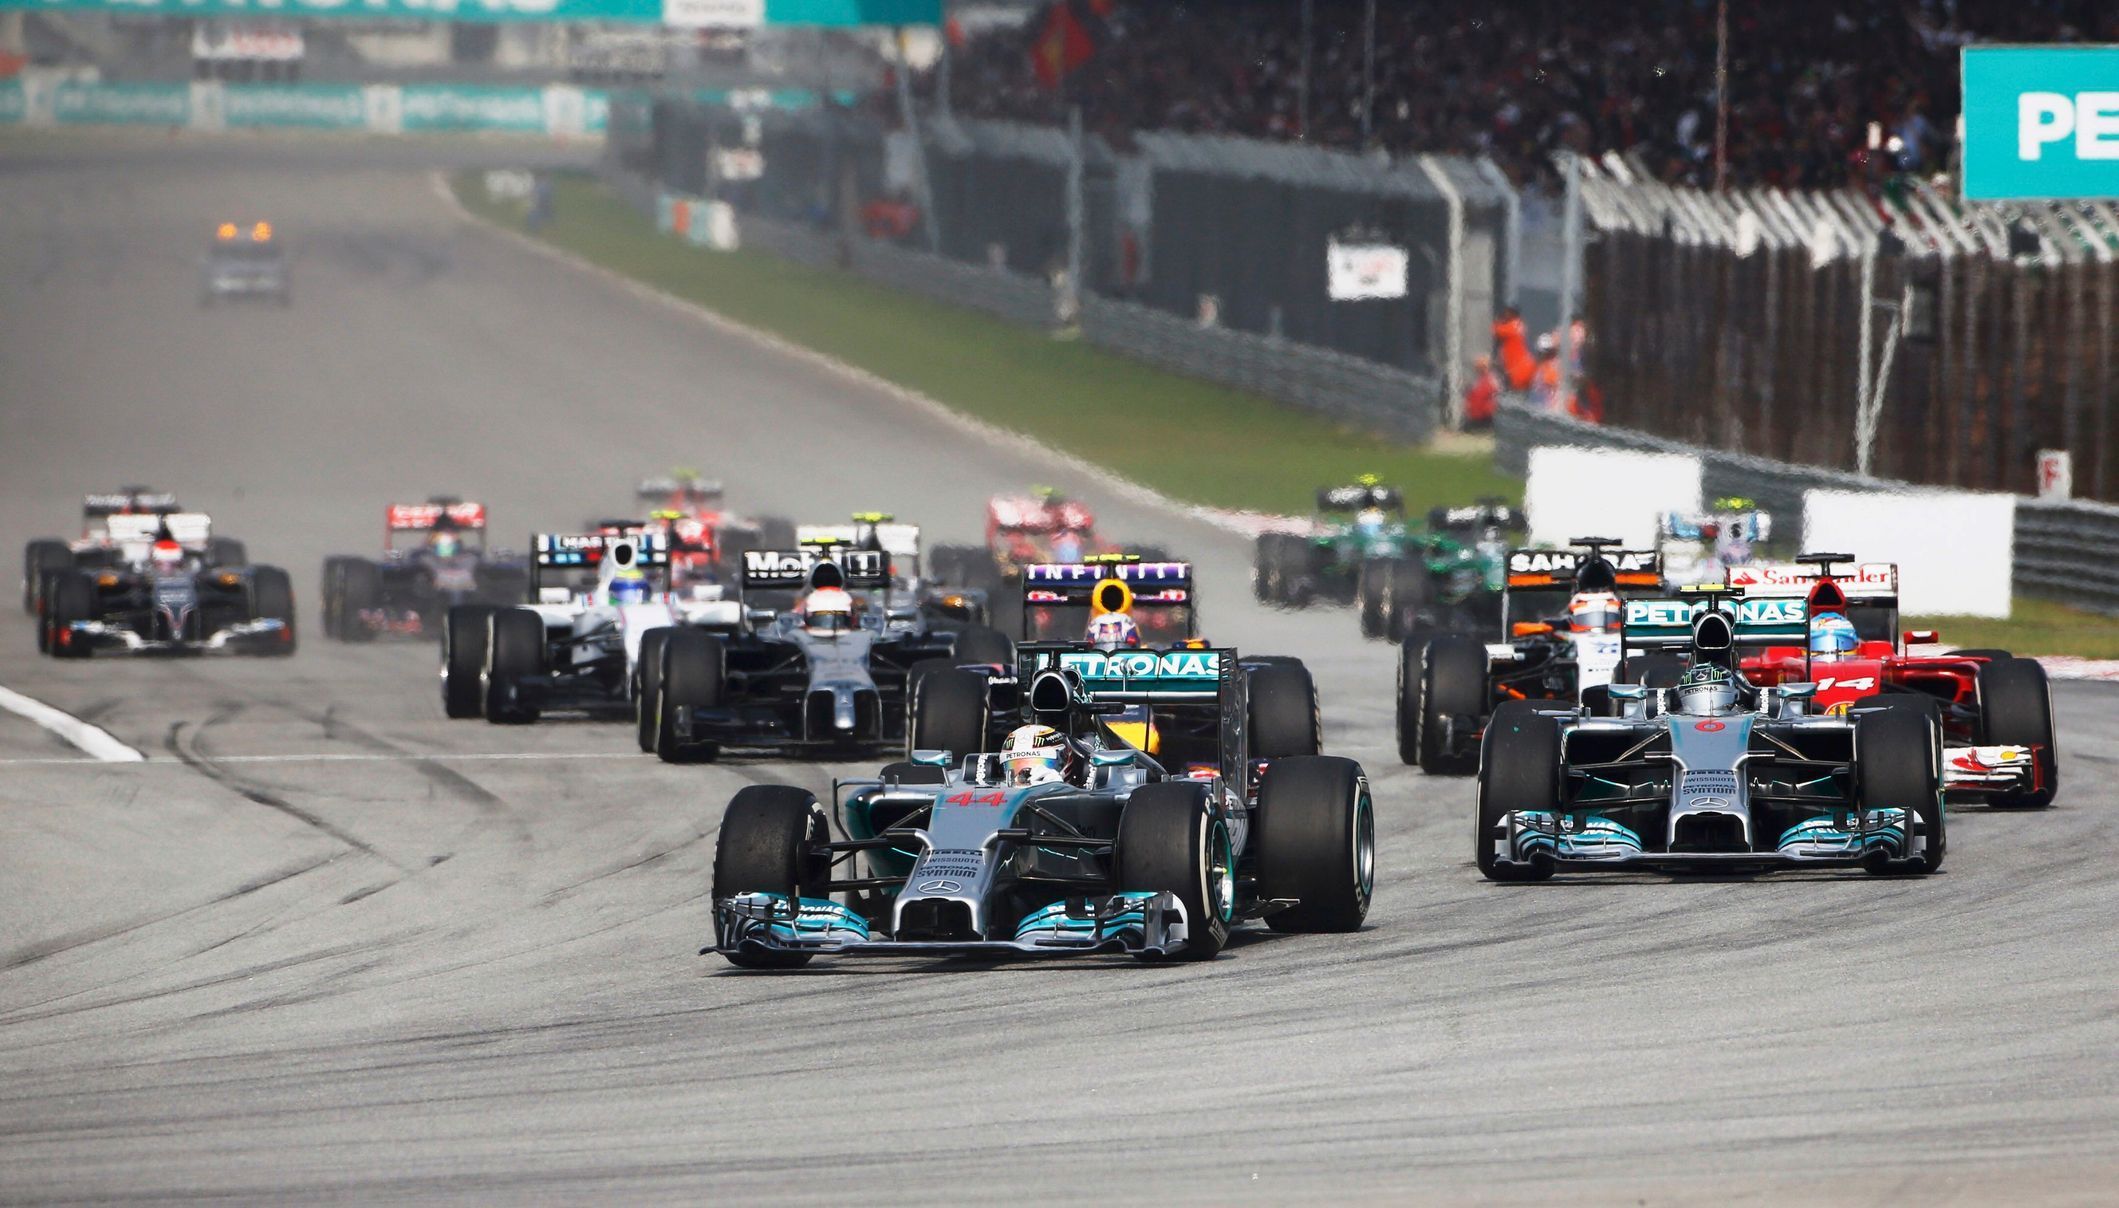 Mercedes Formula One driver Hamilton of Britain leads the pack during the Malaysian F1 Grand Prix at Sepang International Circuit outside Kuala Lumpur